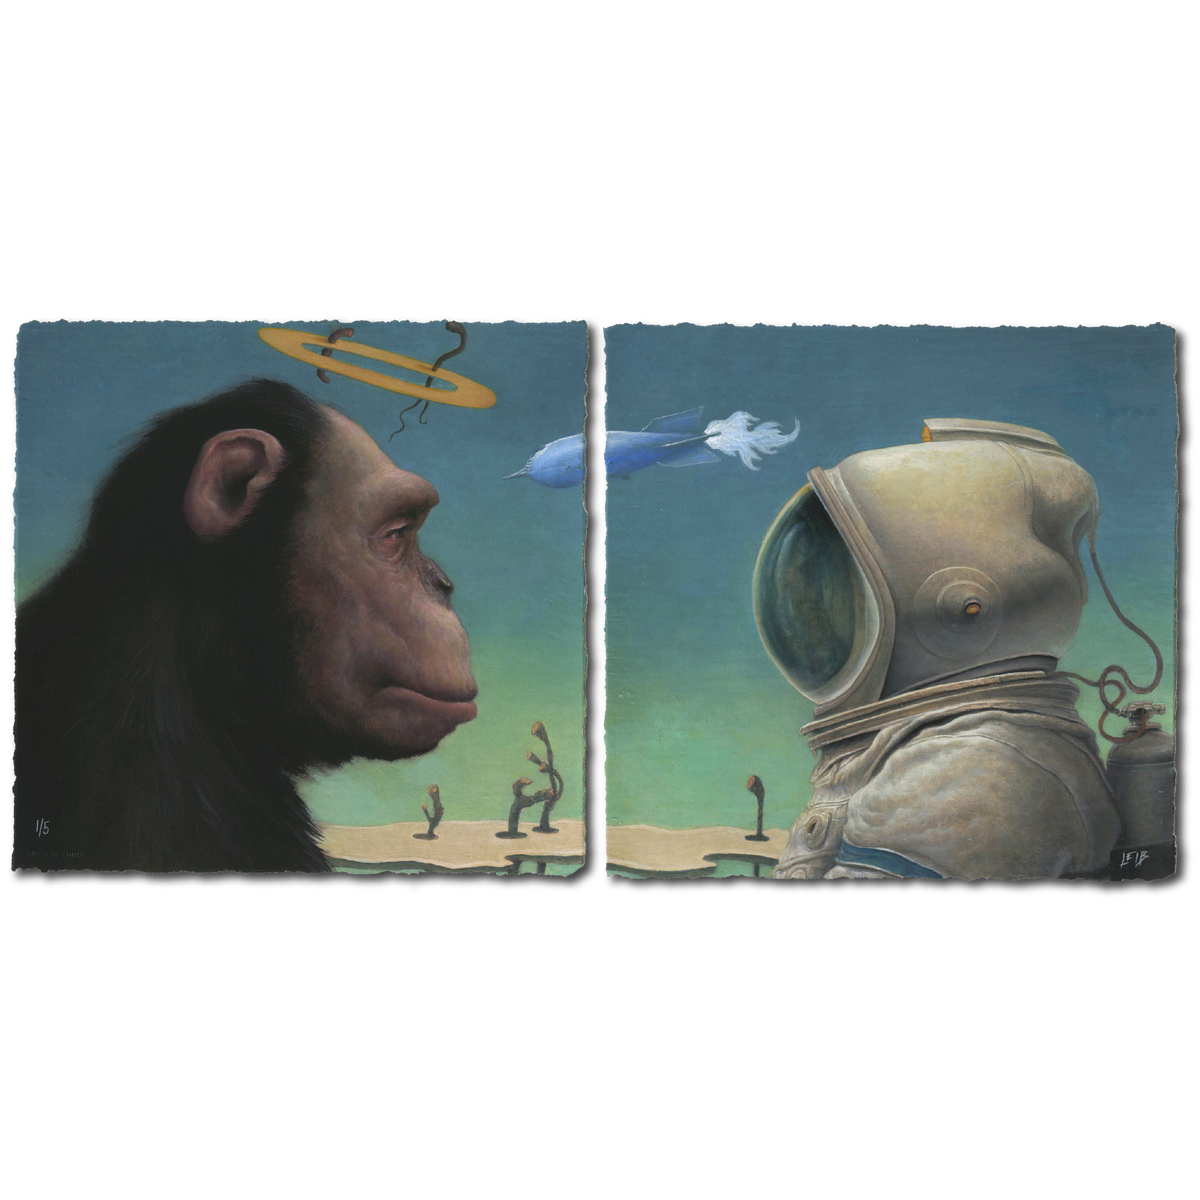 Chris Leib &quot;Uncommon Agreement&quot; - Hand-Embellished Diptych Edition #1/5 - 17 x 17&quot; Each